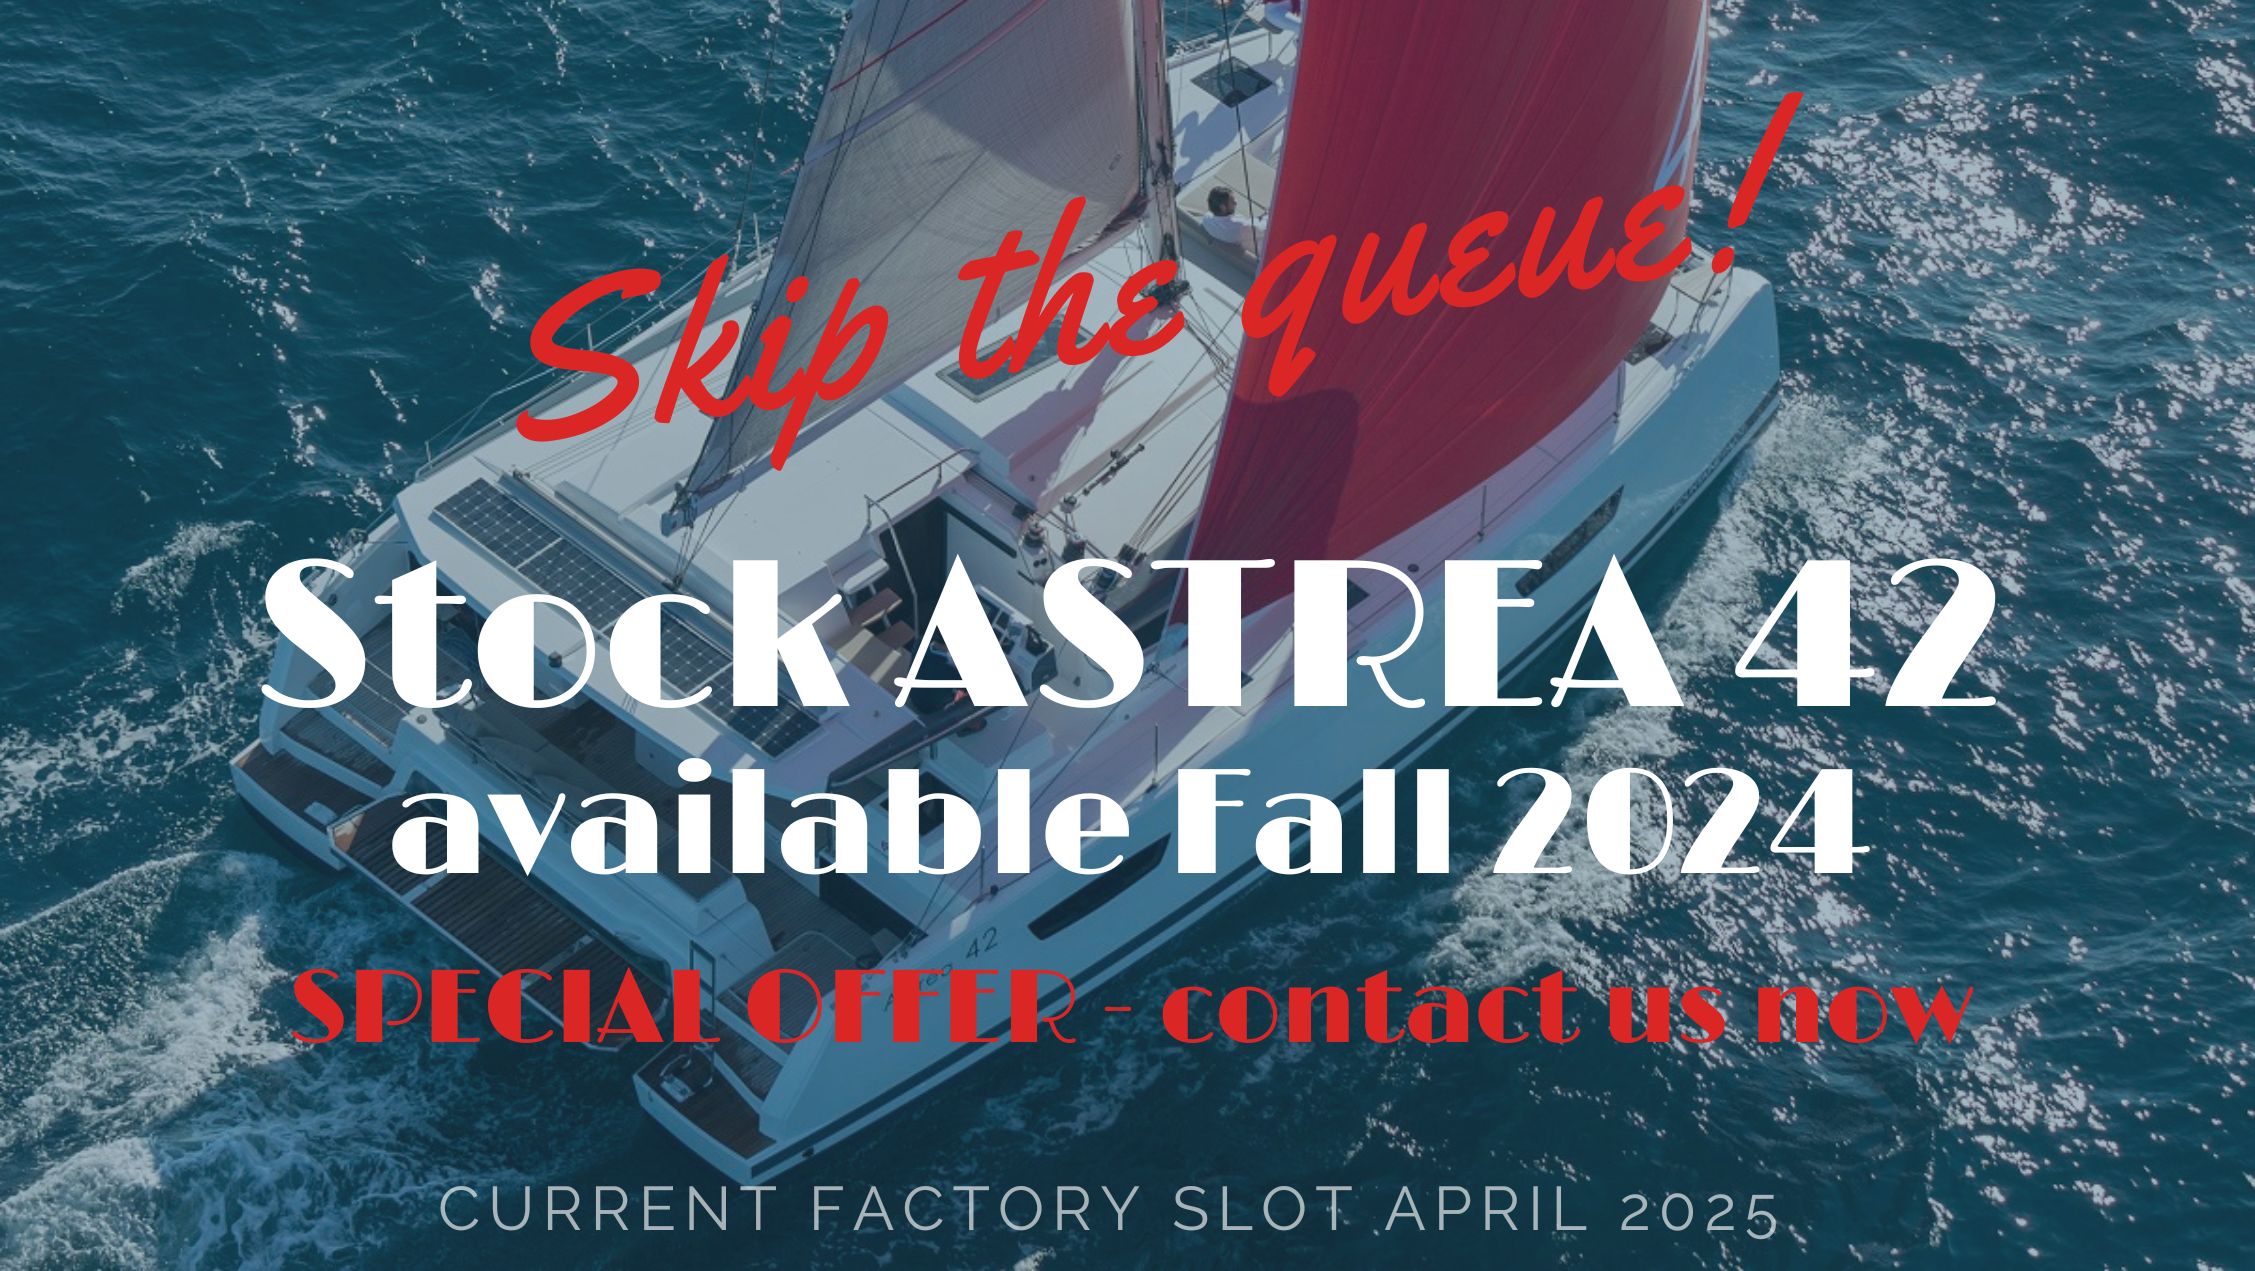 Fountaine Pajot Astrea 42 for sale for fall 2024.jpg